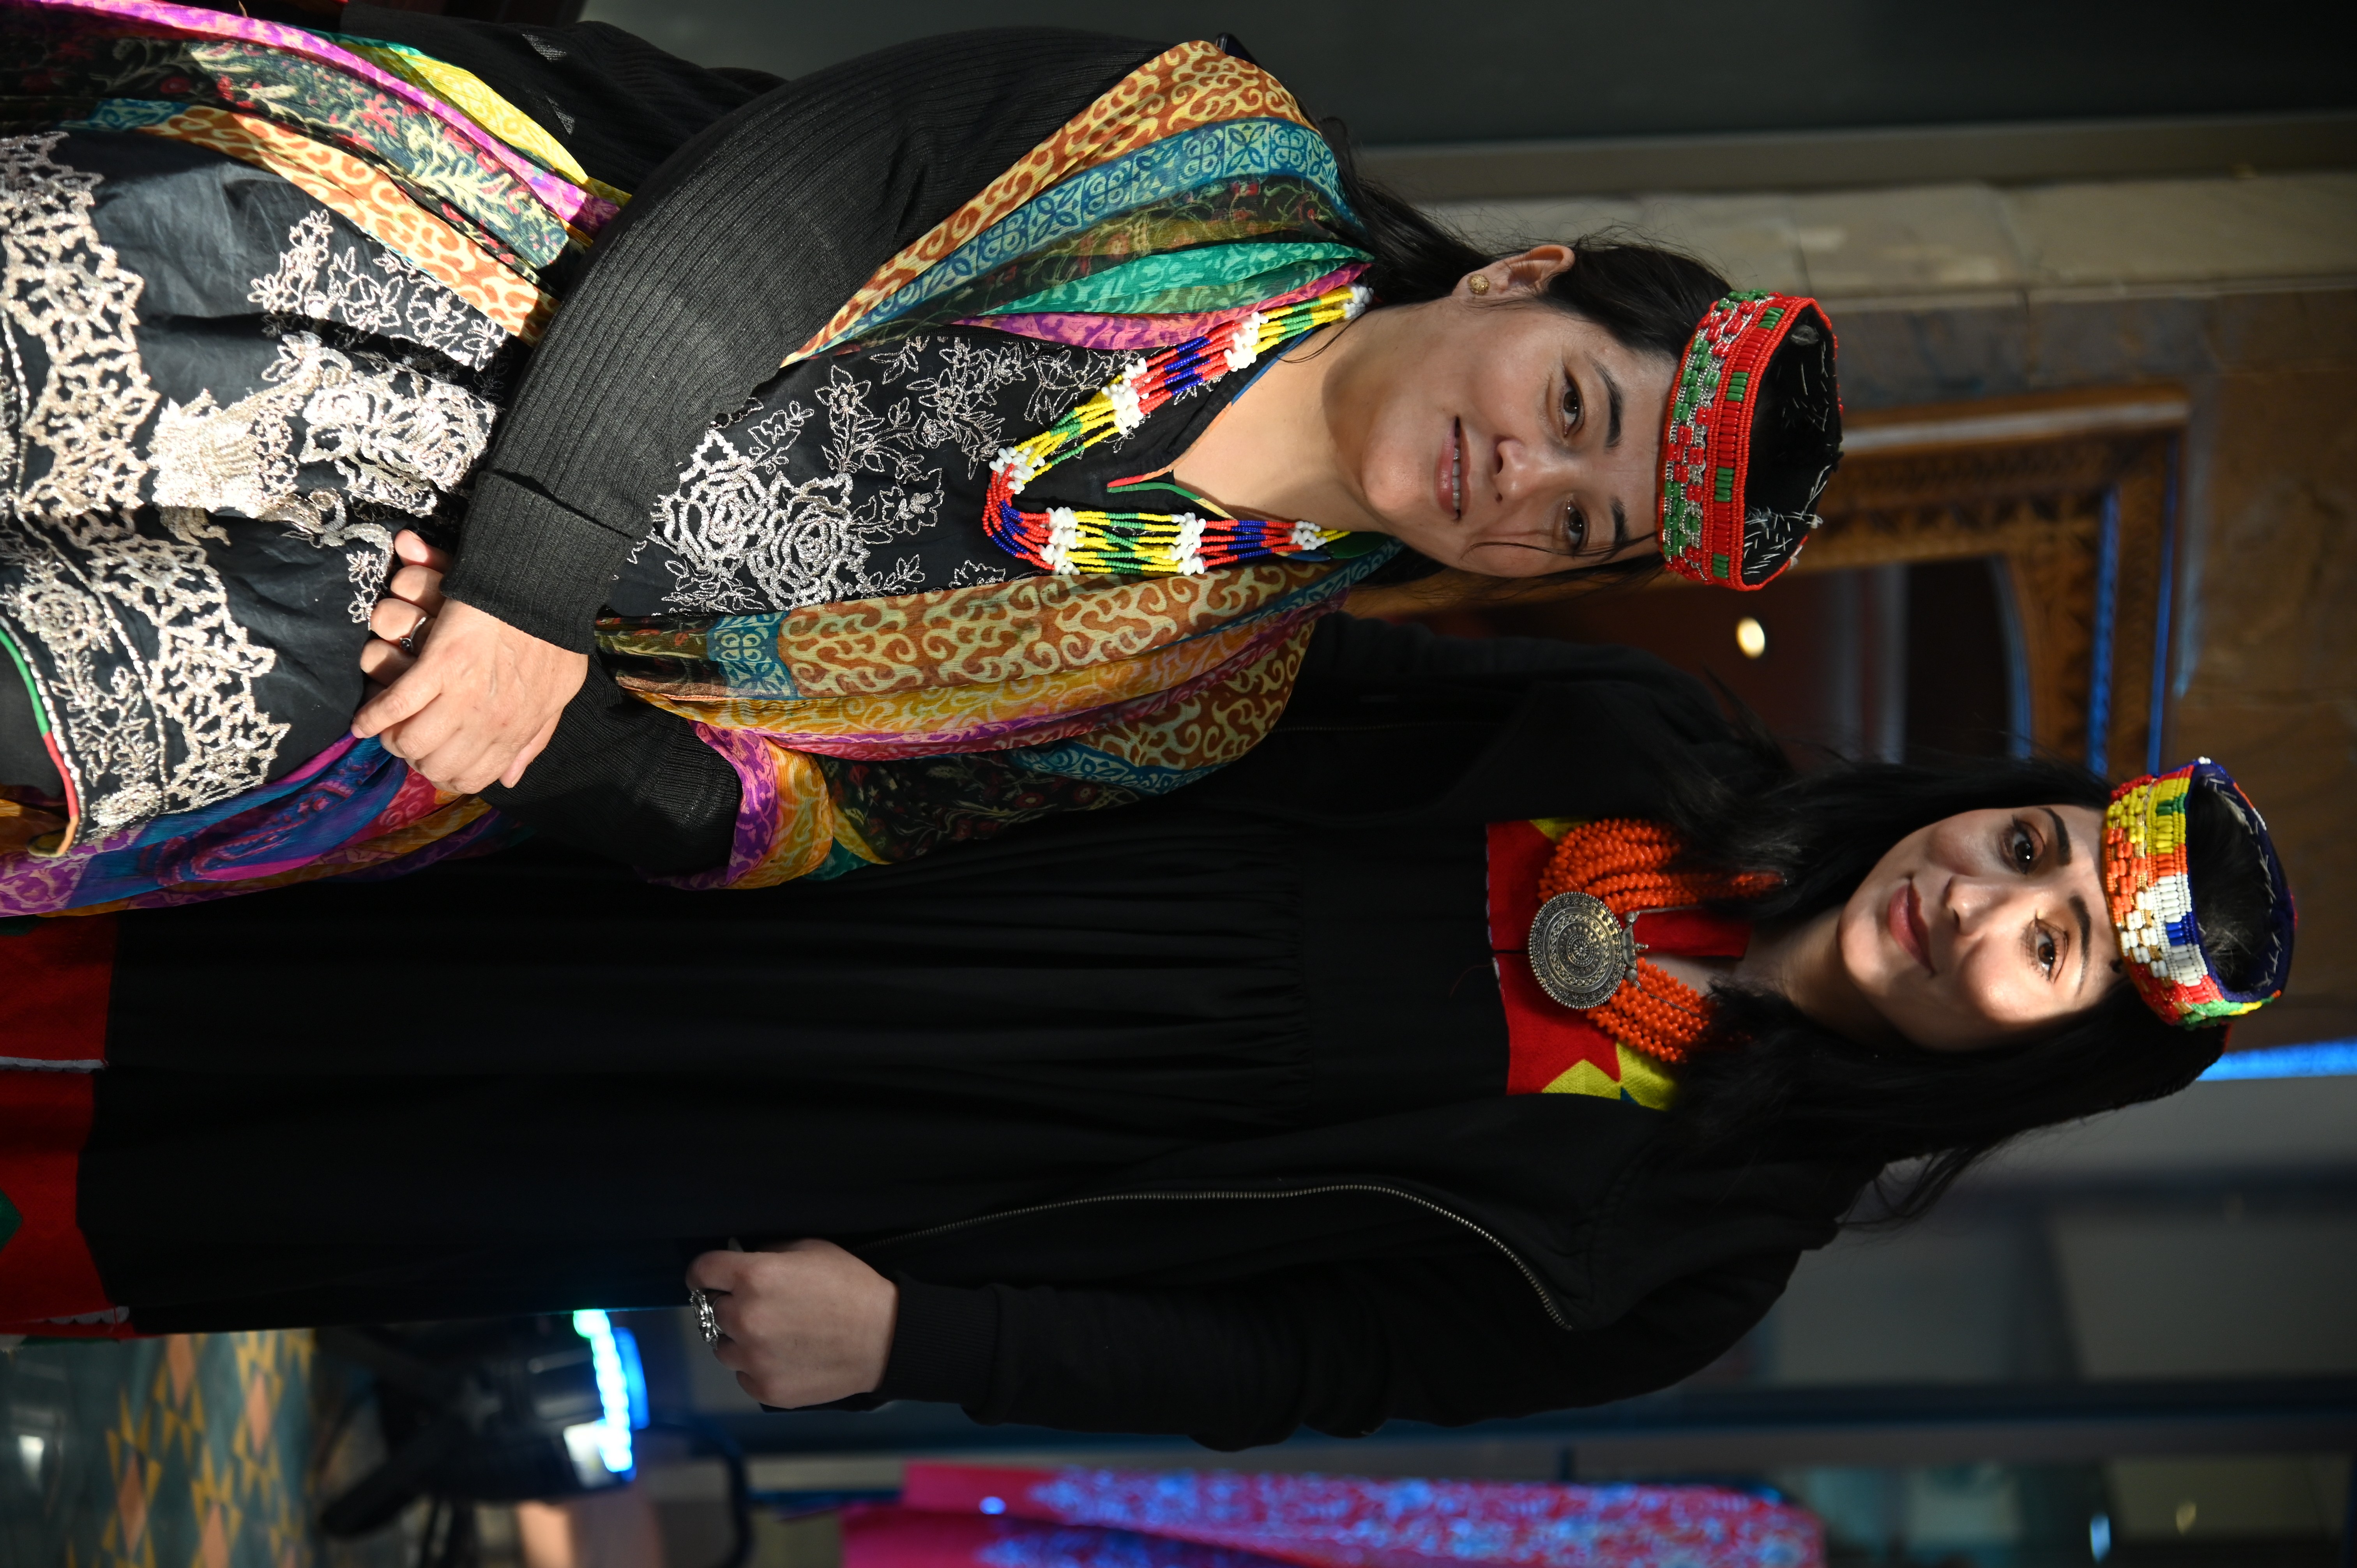 Women symbolizing the northern culture of Pakistan  by wearing an ethenic traditional cap made of colorful beads